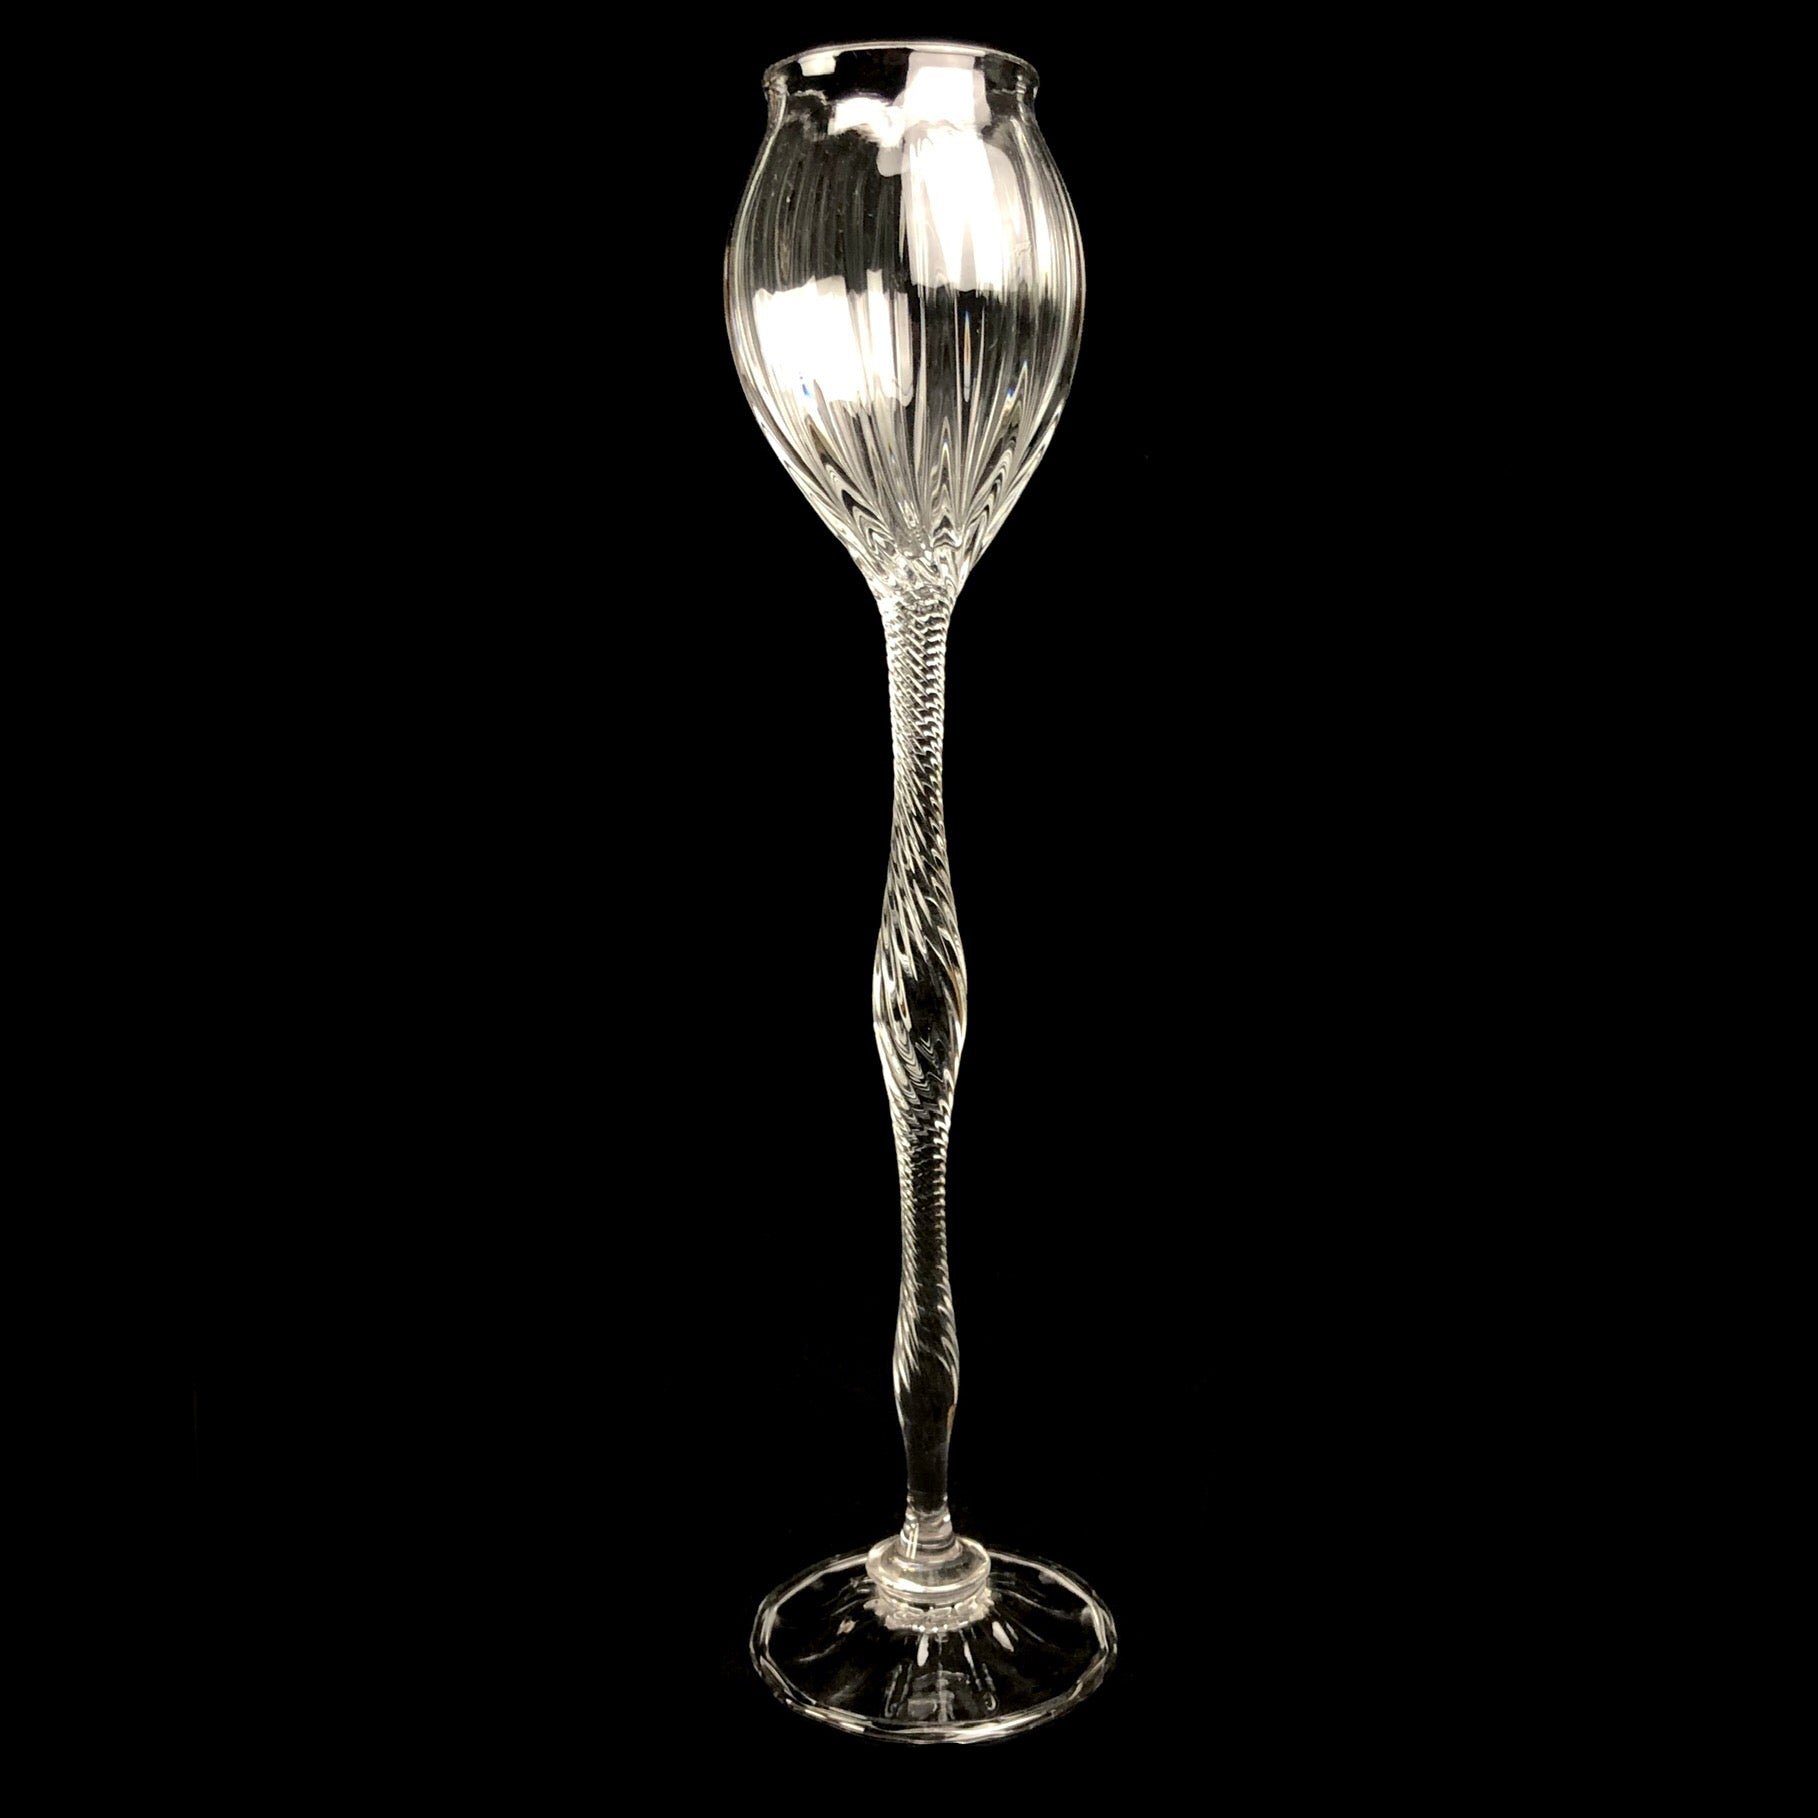 Clear glass goblet with ornate stem